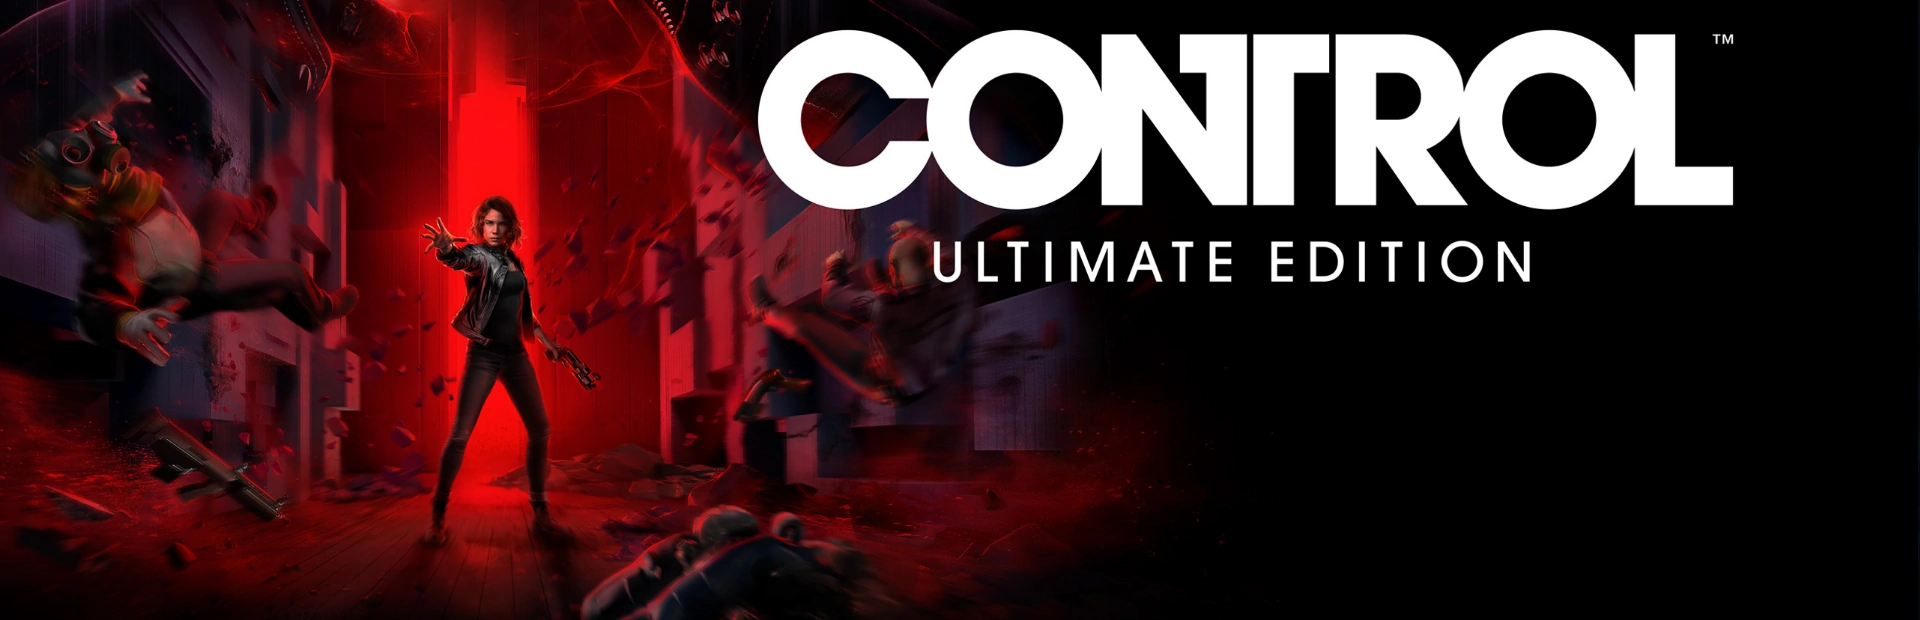 Control.Ultimate.Edition.banner1